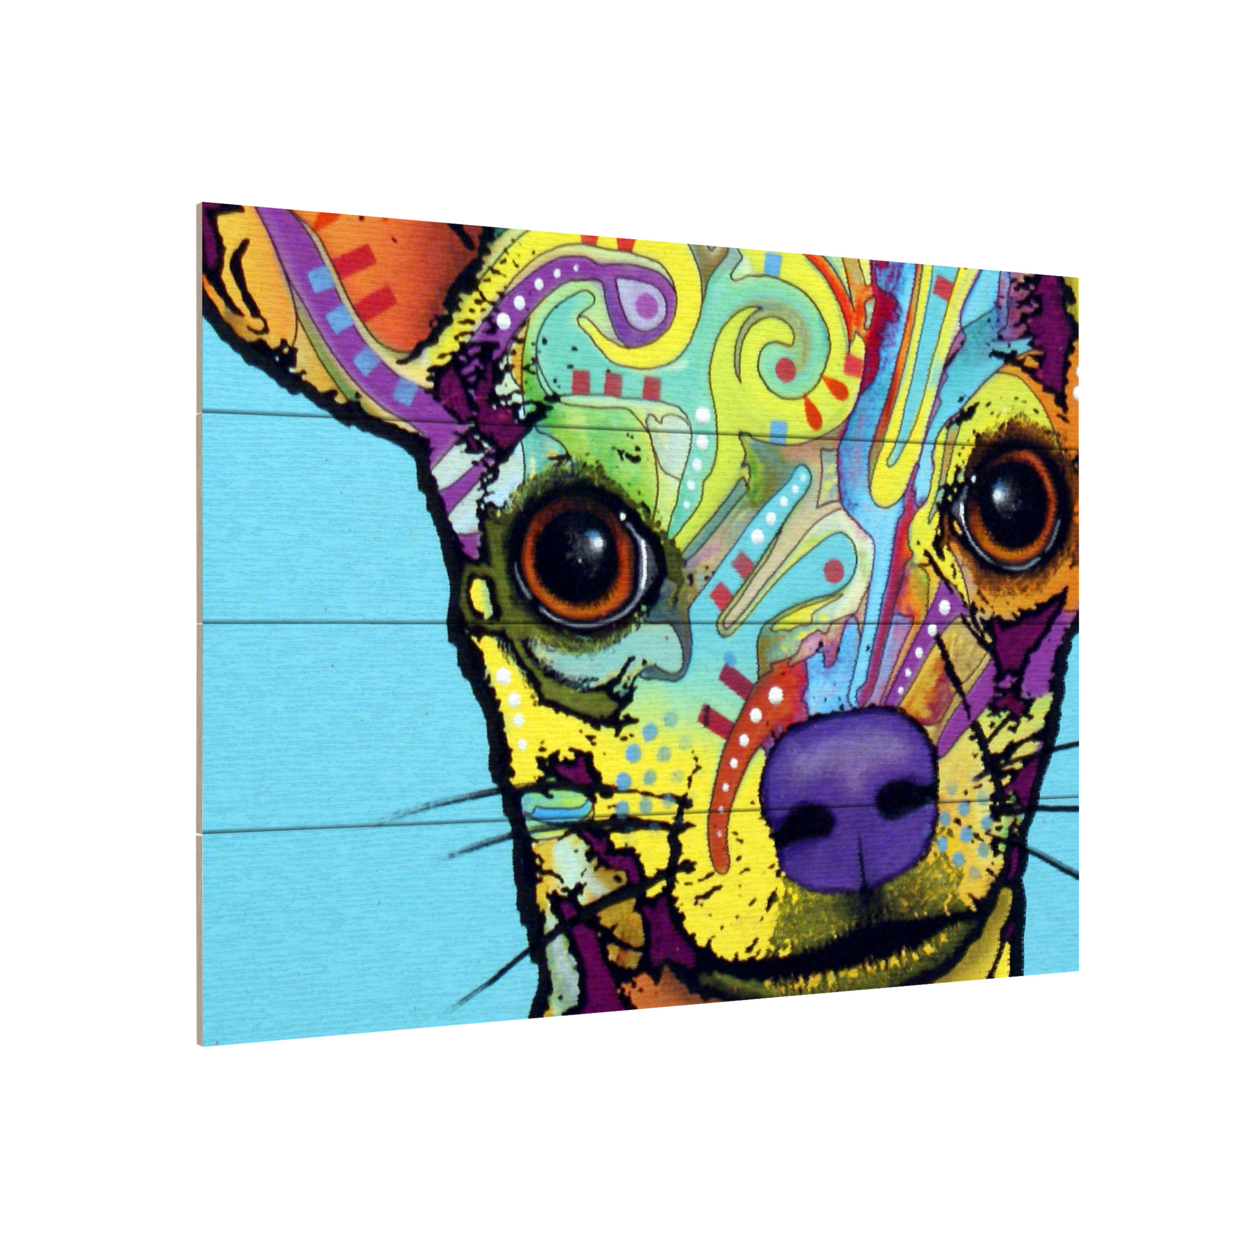 Wall Art 12 X 16 Inches Titled Chihuahua Ready To Hang Printed On Wooden Planks